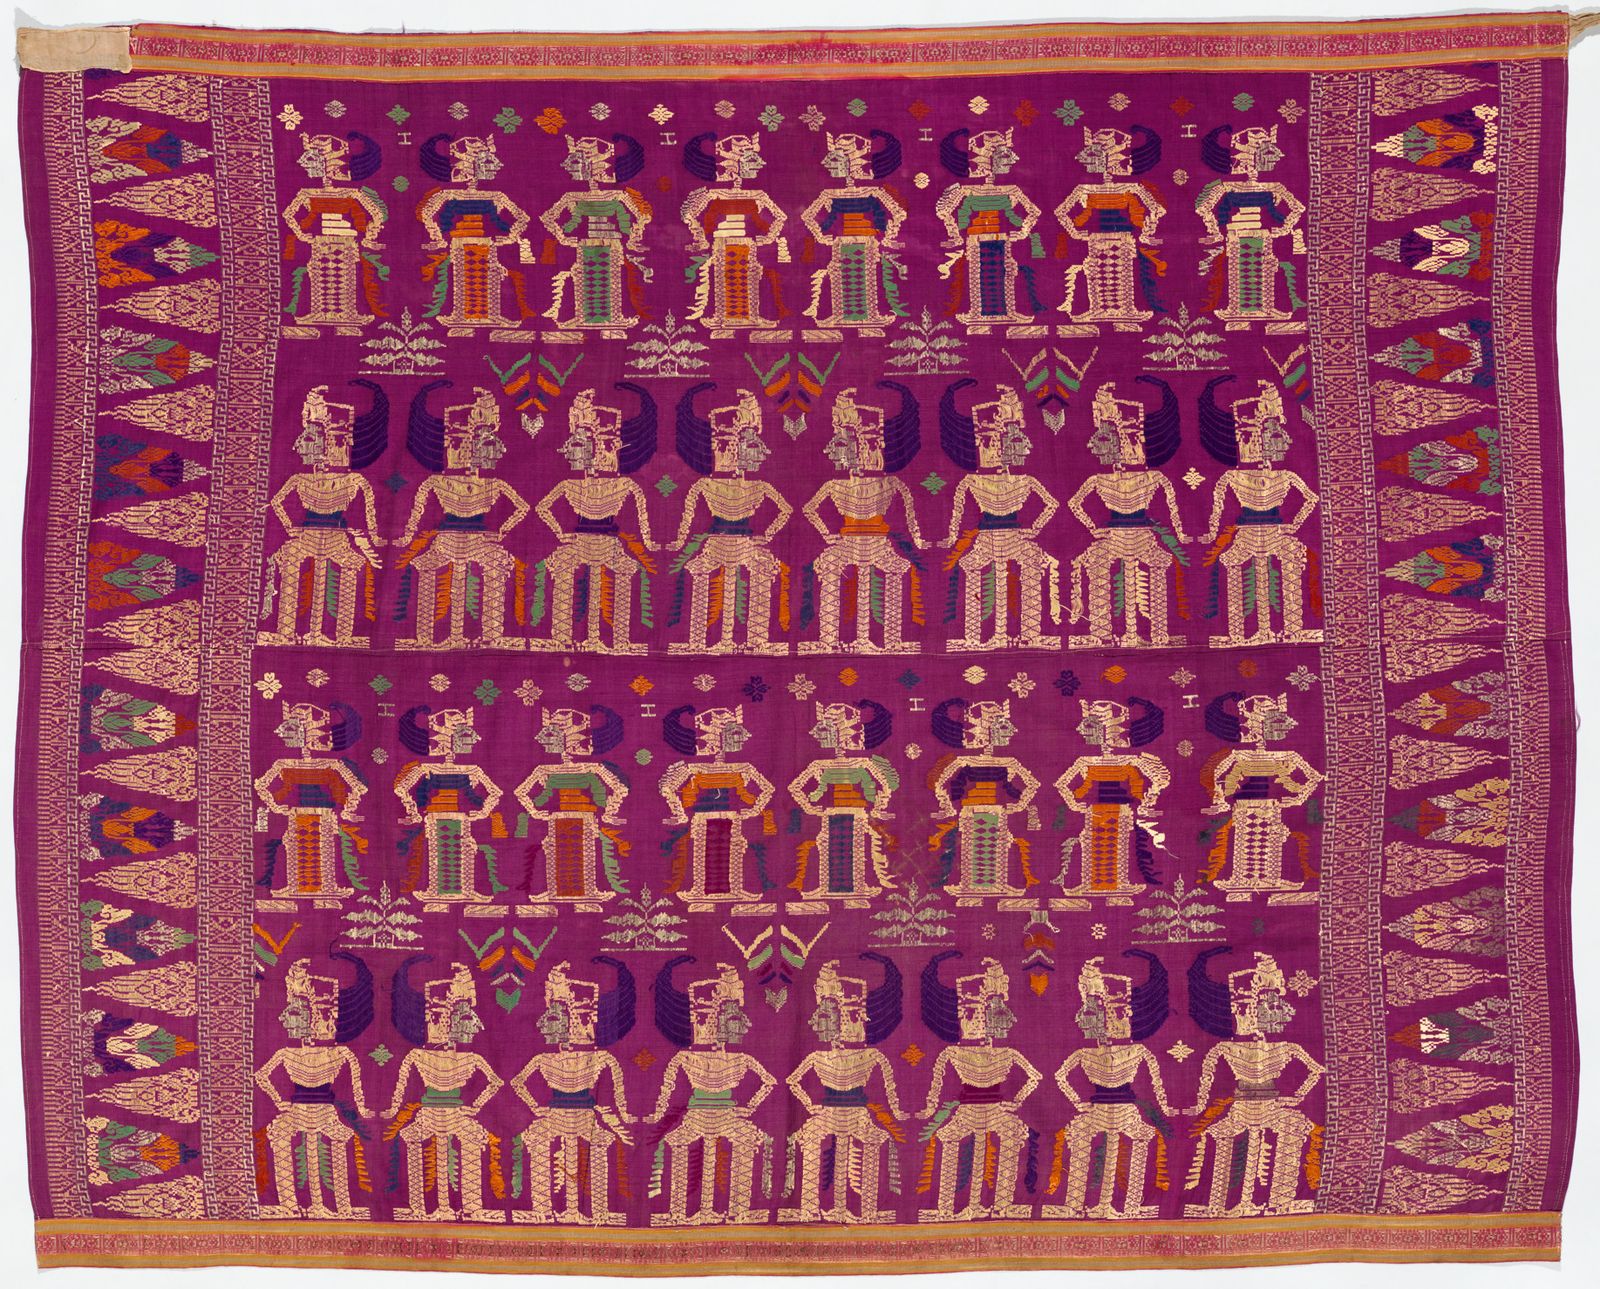 A richly coloured woven textile, in purple, orange, green and deep blue with gold thread patterened embellishments. Pictures depict dancers in traditional Balinese dress.